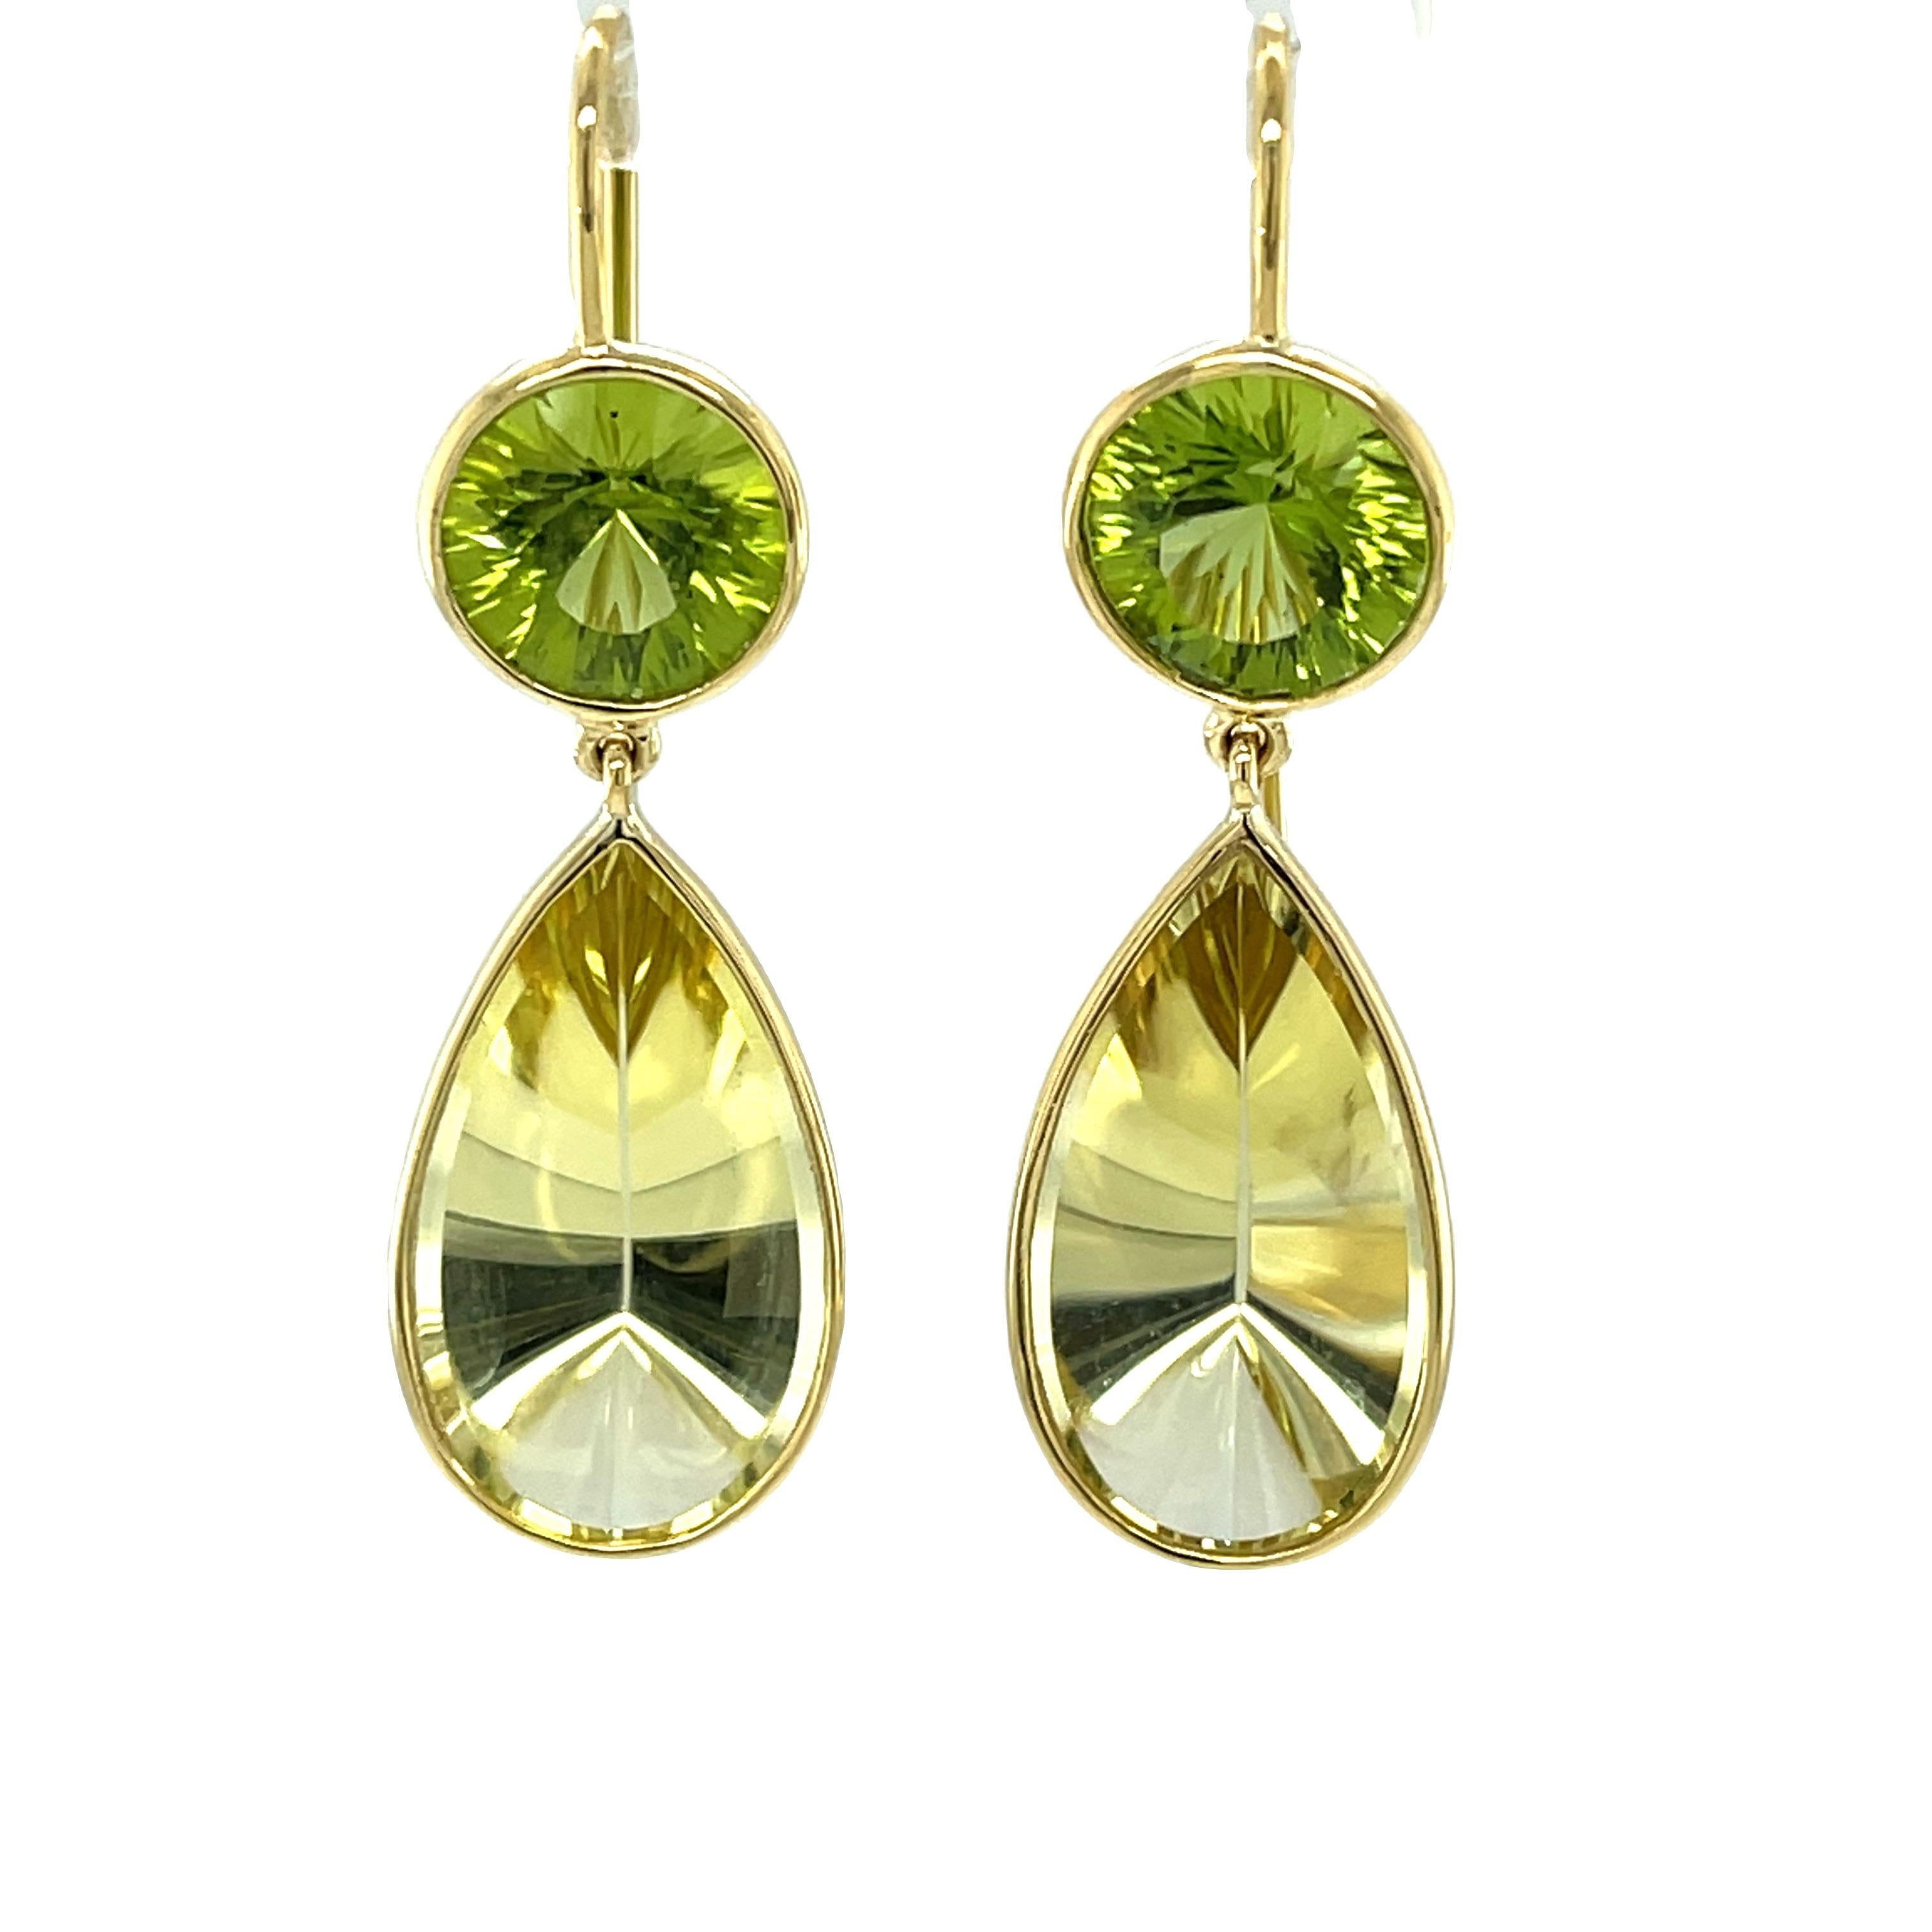 These pretty and unusual peridot and citrine dangle earrings are so modern and fun! Bright green peridot rounds are paired with fantasy-cut citrine pears in a bright 